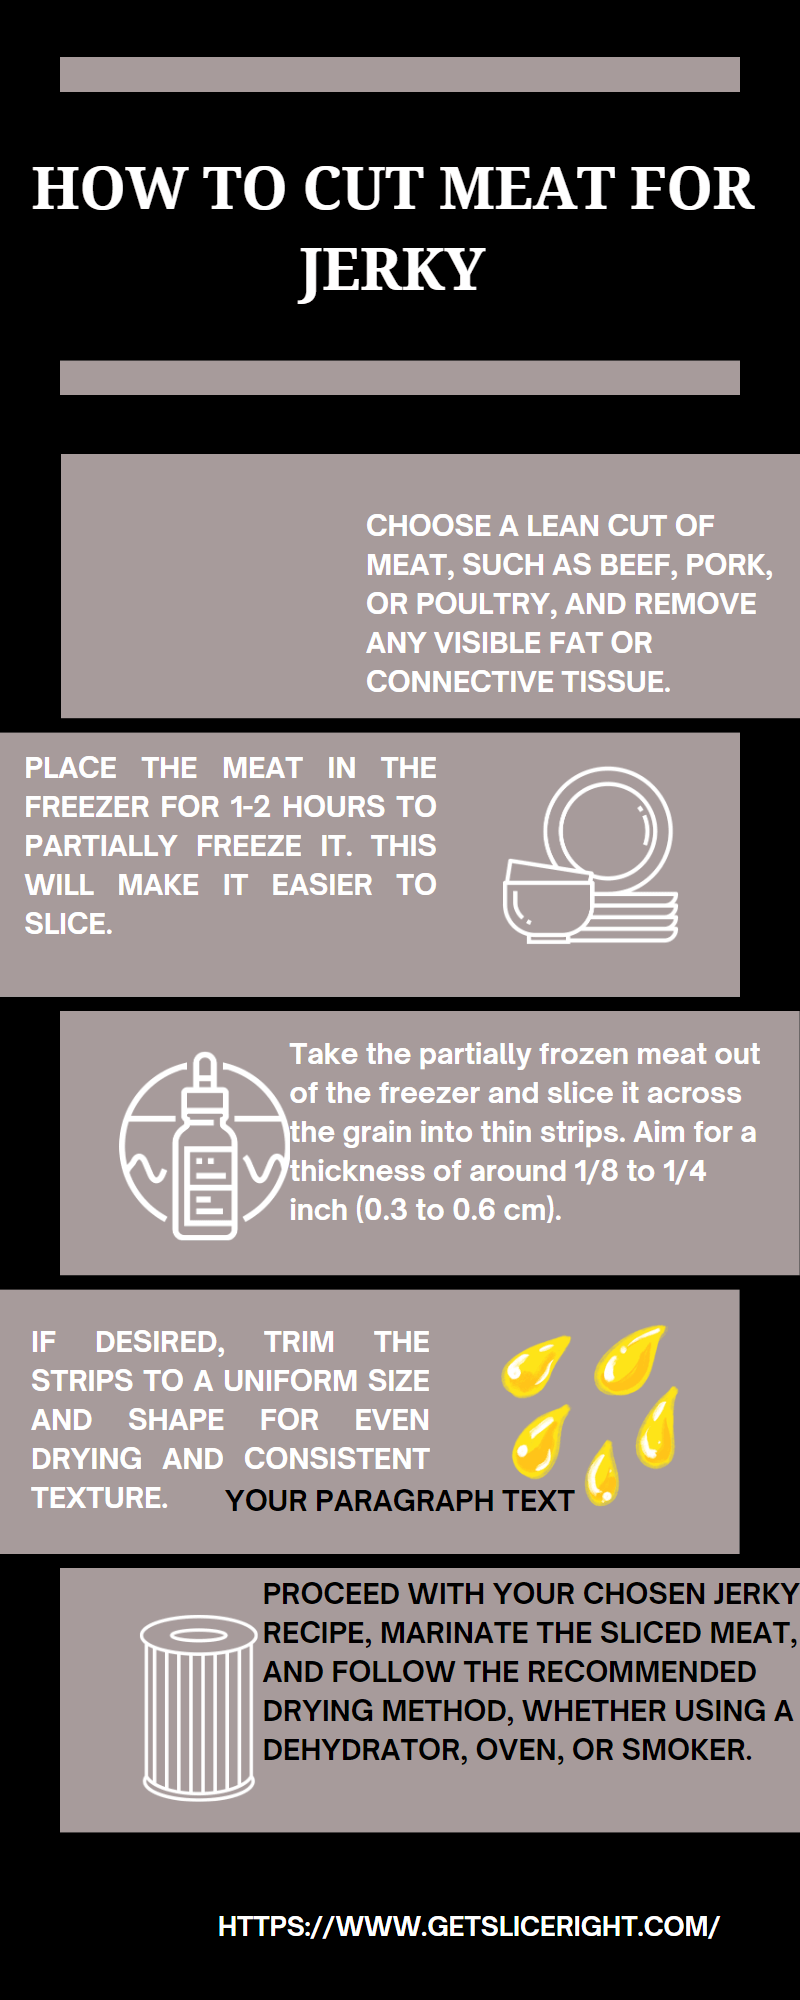 How to cut meat for jerky - getsliceright infographic